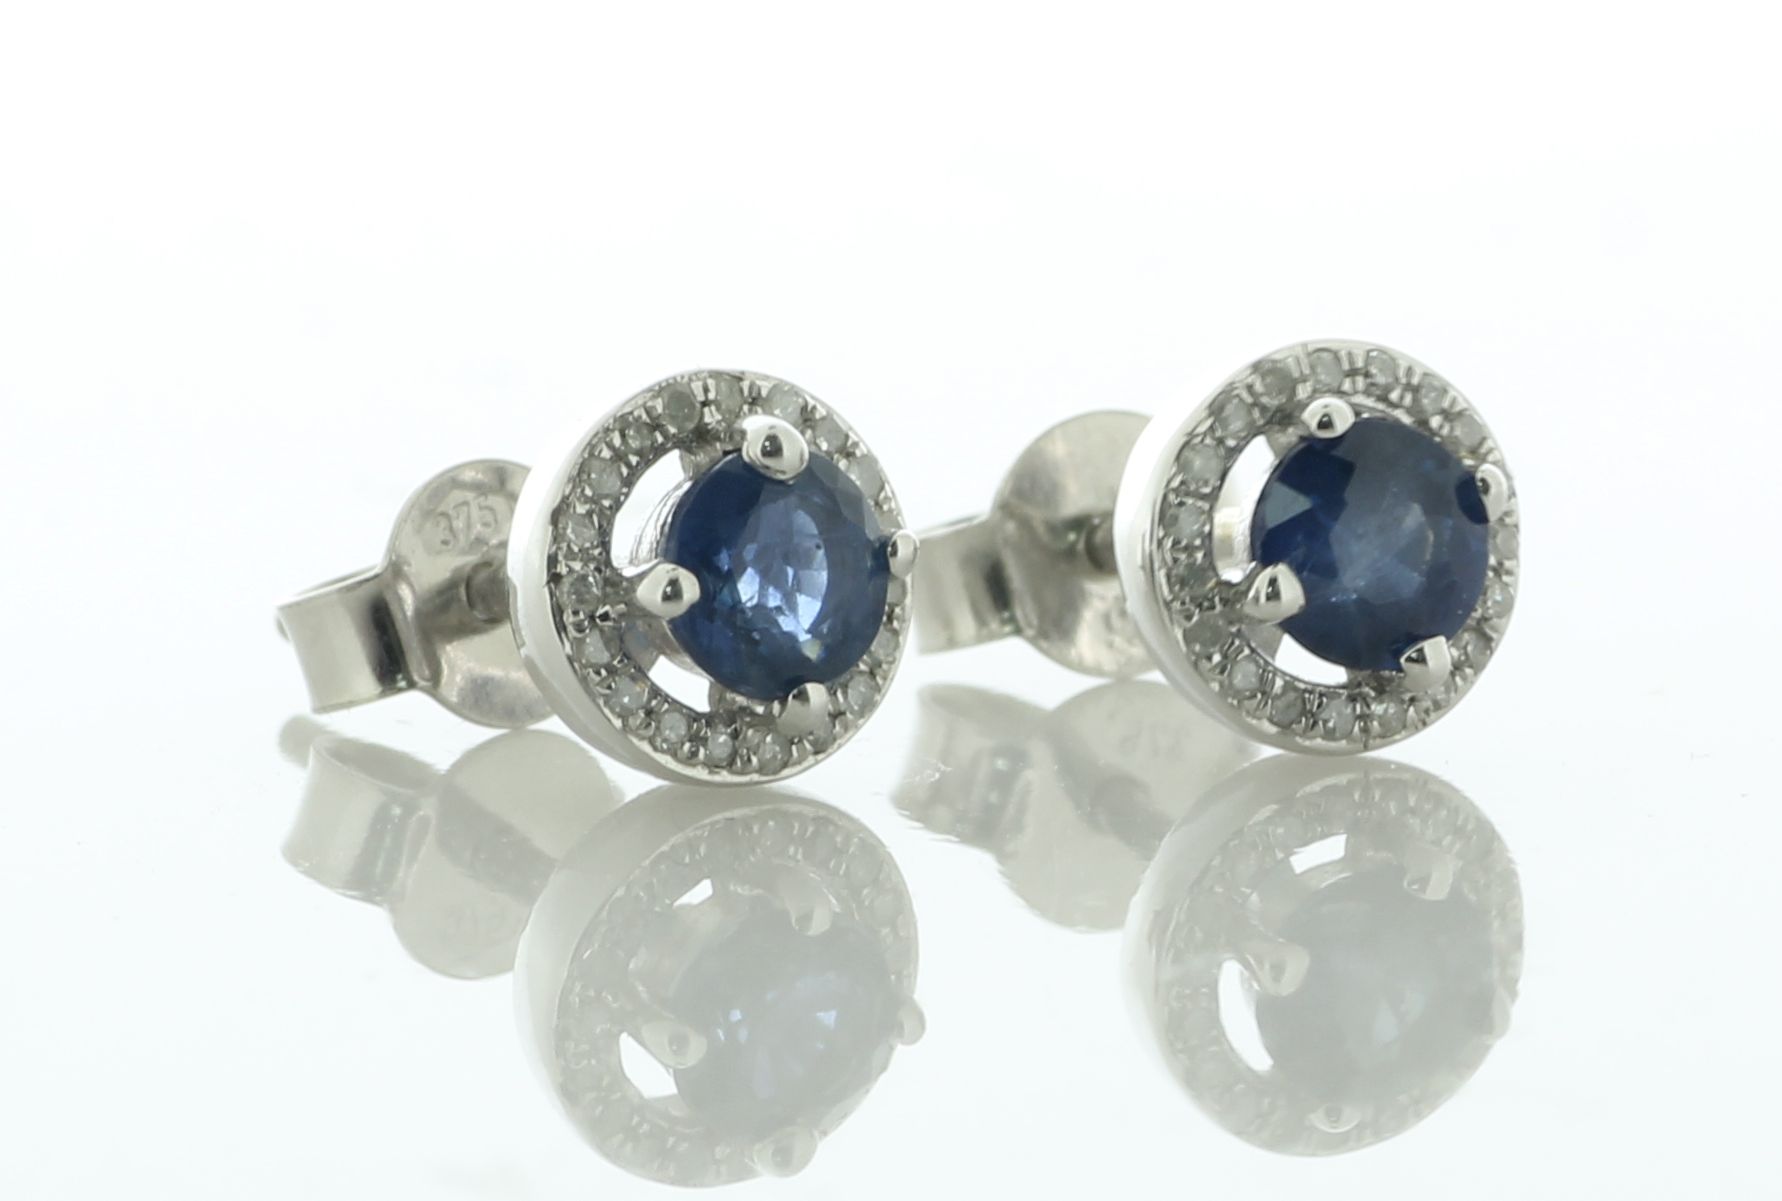 9ct White Gold Single Stone With Halo Sapphire Diamond Stud Earring (S0.51) 0.10 Carats - Valued - Image 2 of 4